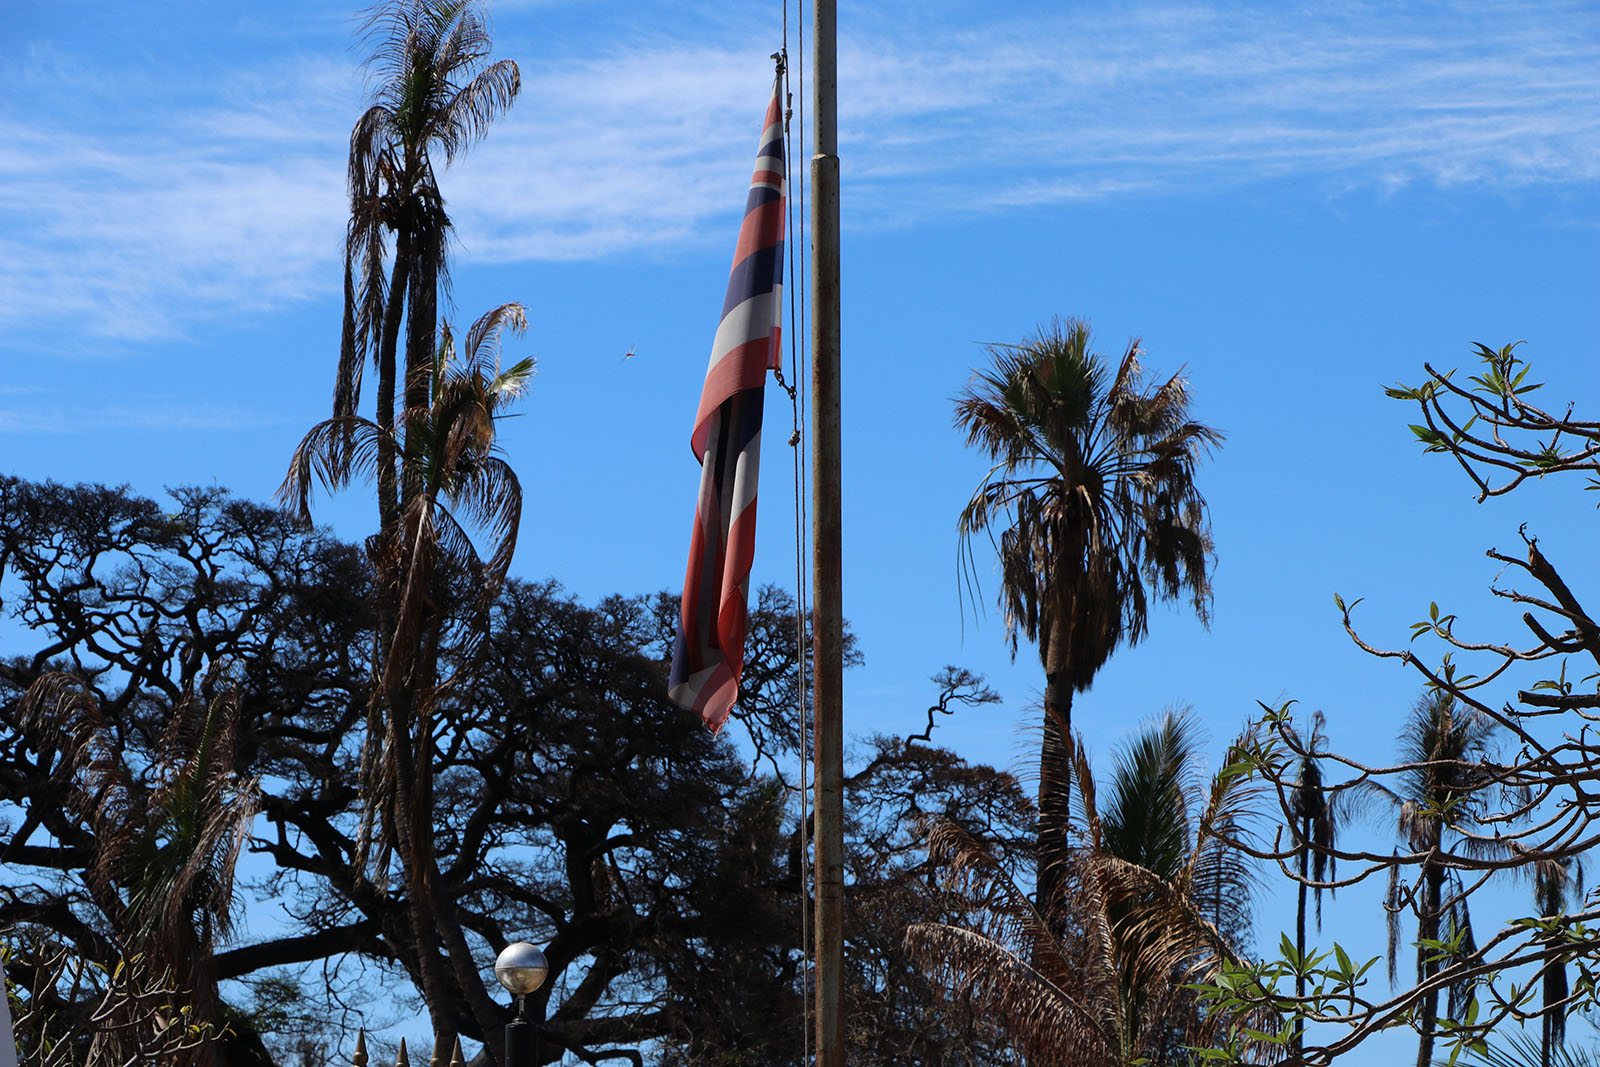 The Hawaiian flag seen standing after the fires.